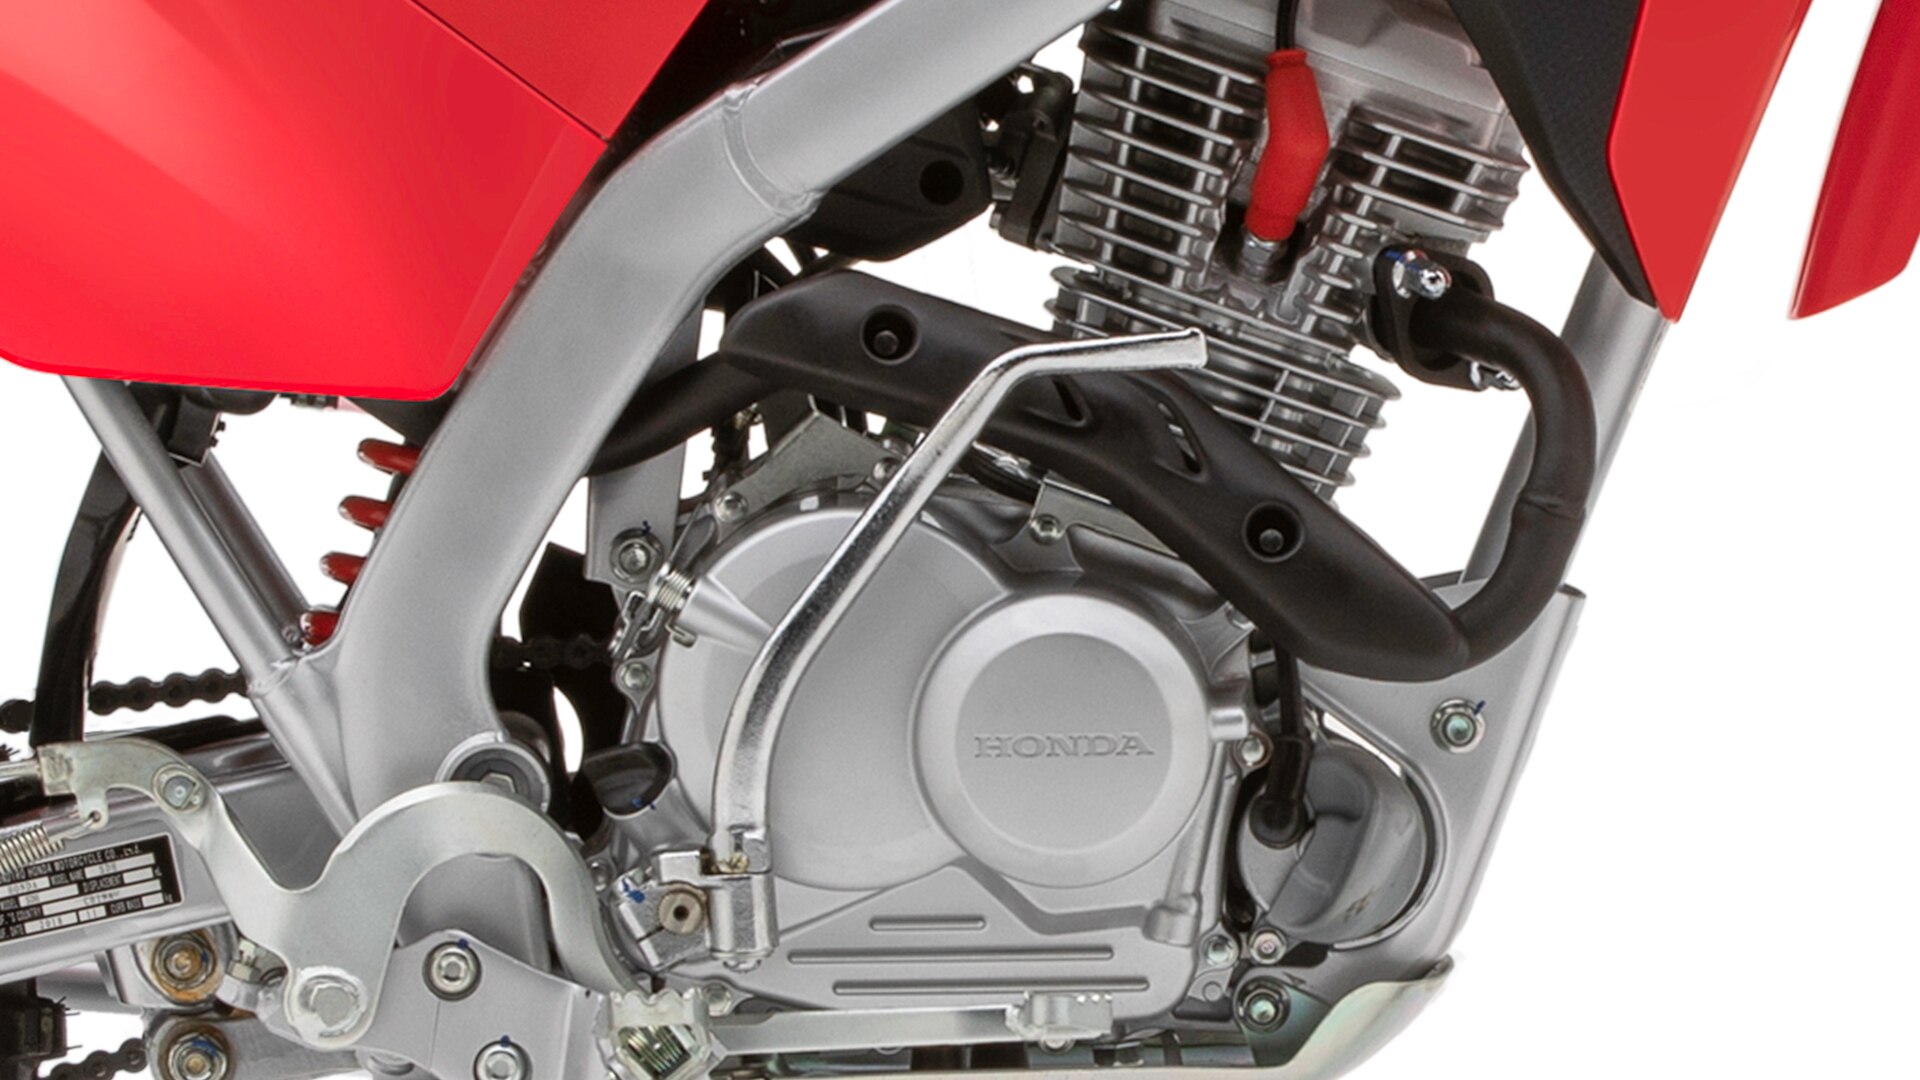 Close-up of 4-stroke air-cooled single-cylinder 125 cc engine and frame.